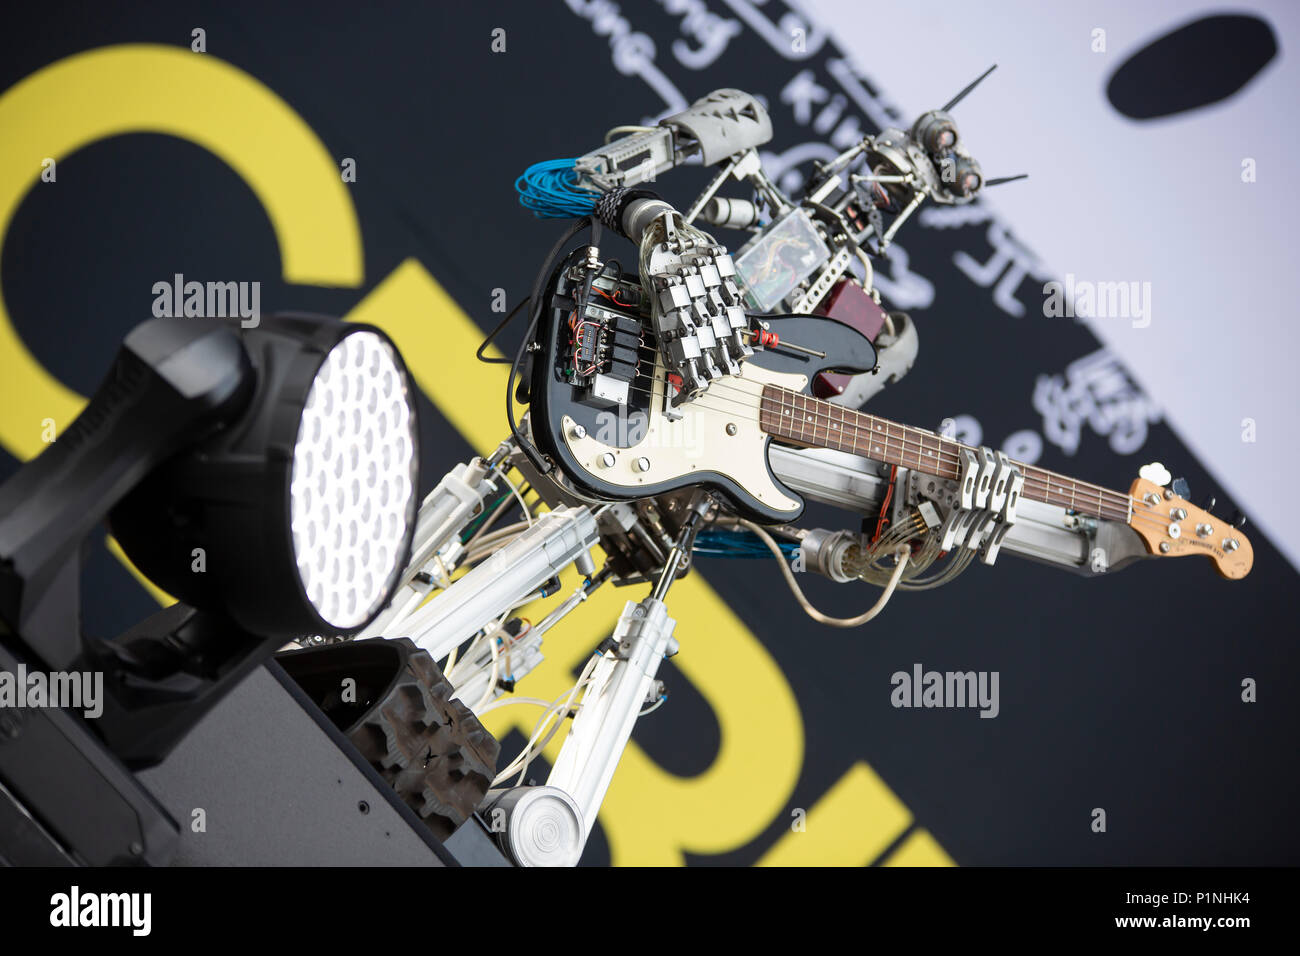 Hannover, Germany. 12th June, 2018. Robot band Compressorhead (here robot Bones, bass) - based in Berlin and playing on real musical instruments - is performing live at CEBIT 2018, international computer expo and Europe's Business Festival for Innovation and Digitization. Credit: Christian Lademann / Alamy Live News Stock Photo